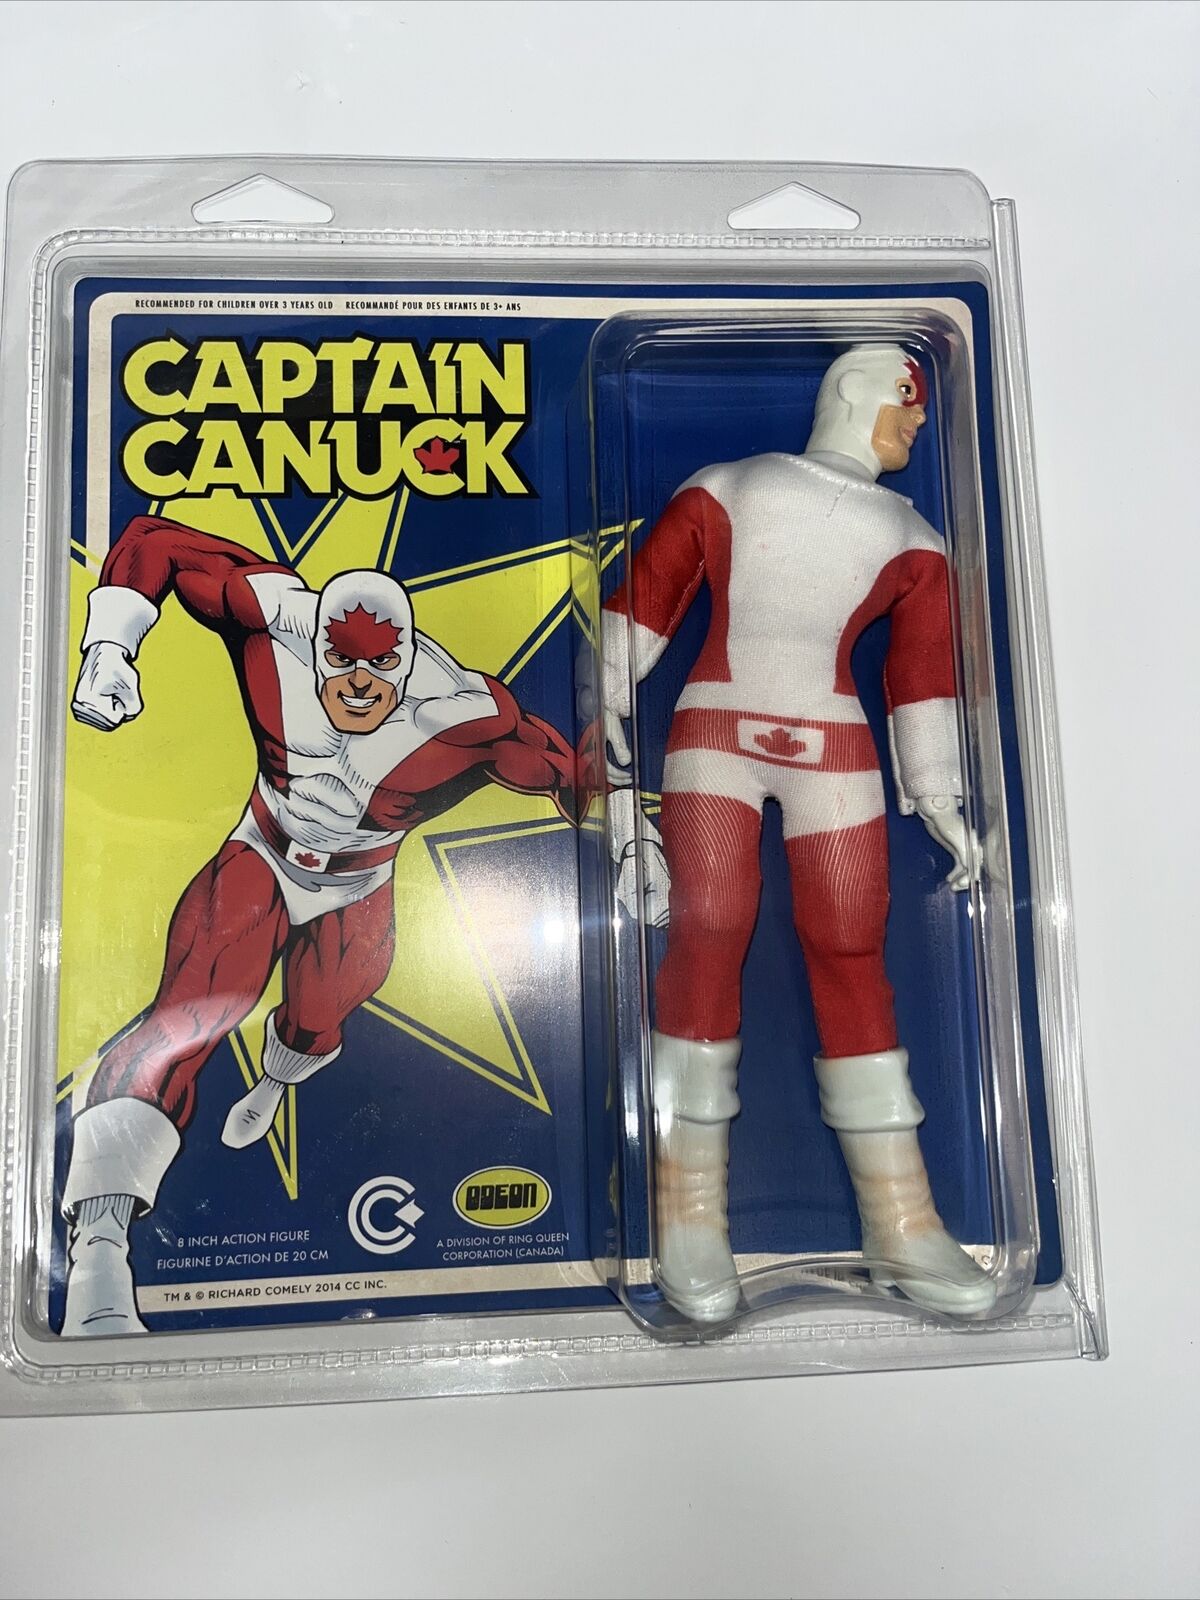 Captain Canuck 8” Figurine (2014)  Odeon Toys Richard Comely